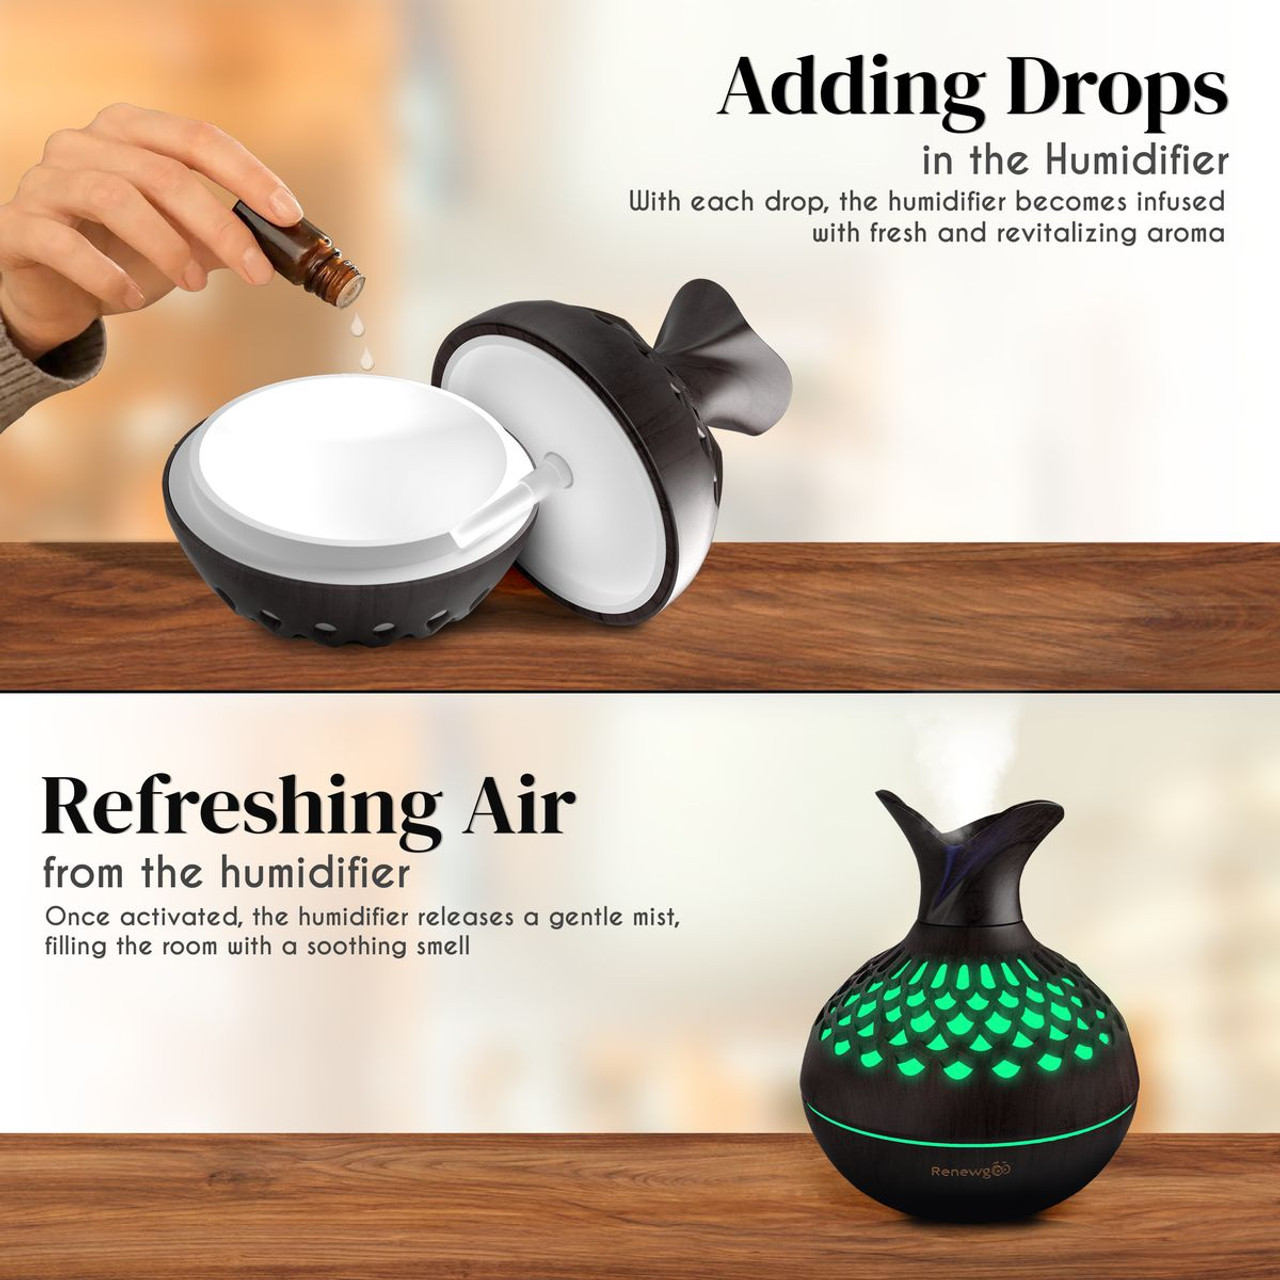 Ultrasonic Aromatherapy Diffuser for Essential Oils product image